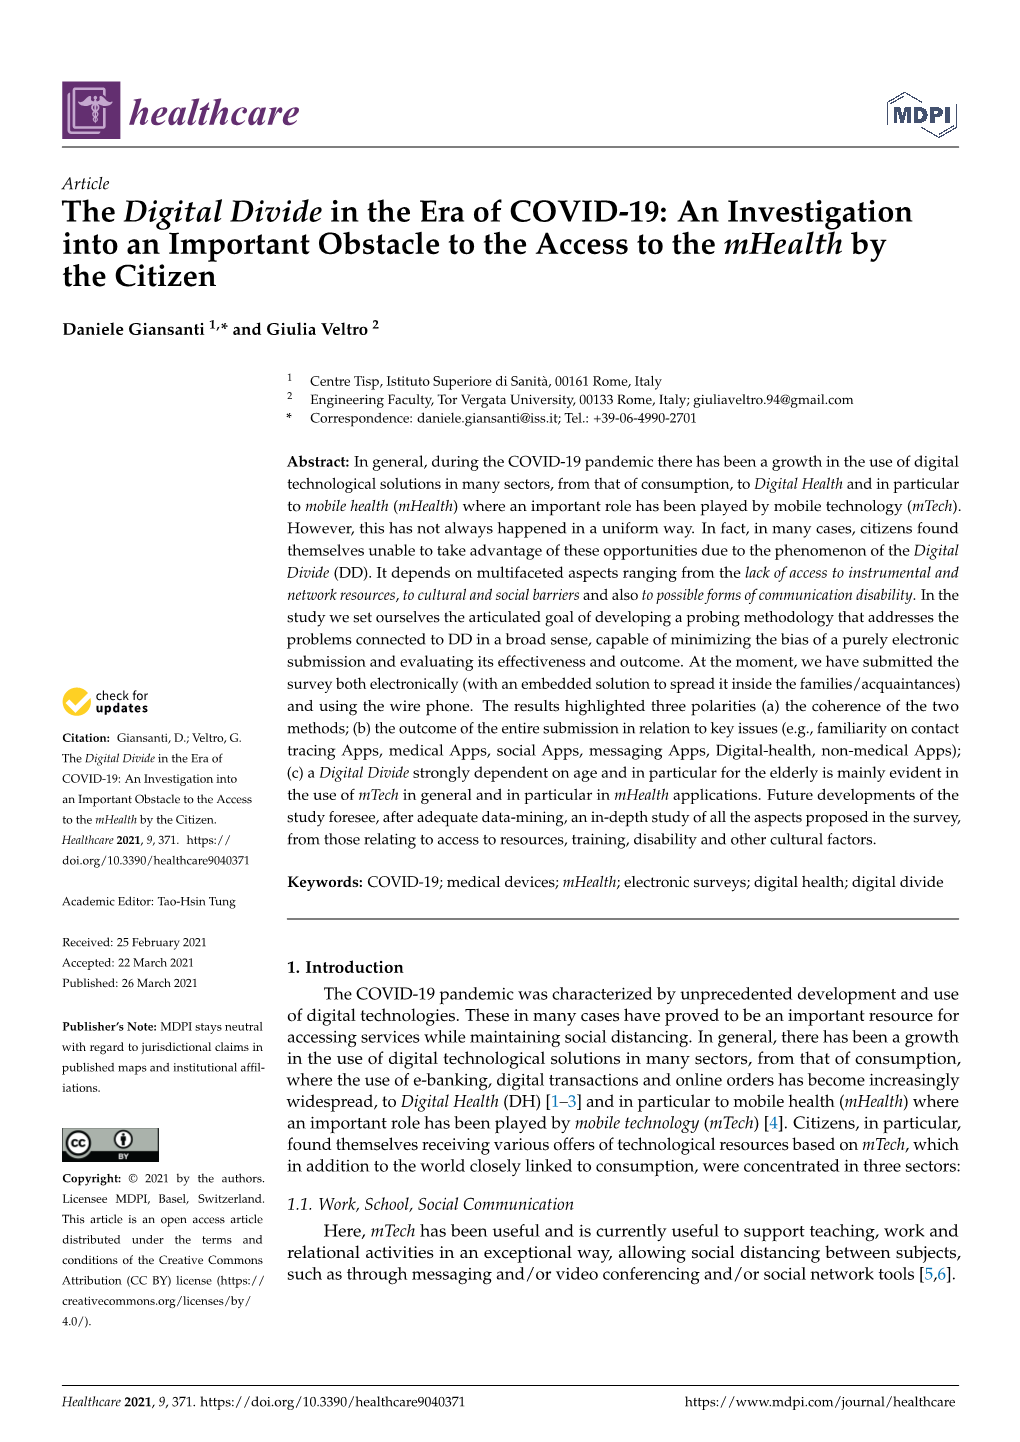 The Digital Divide in the Era of COVID-19: an Investigation Into an Important Obstacle to the Access to the Mhealth by the Citizen